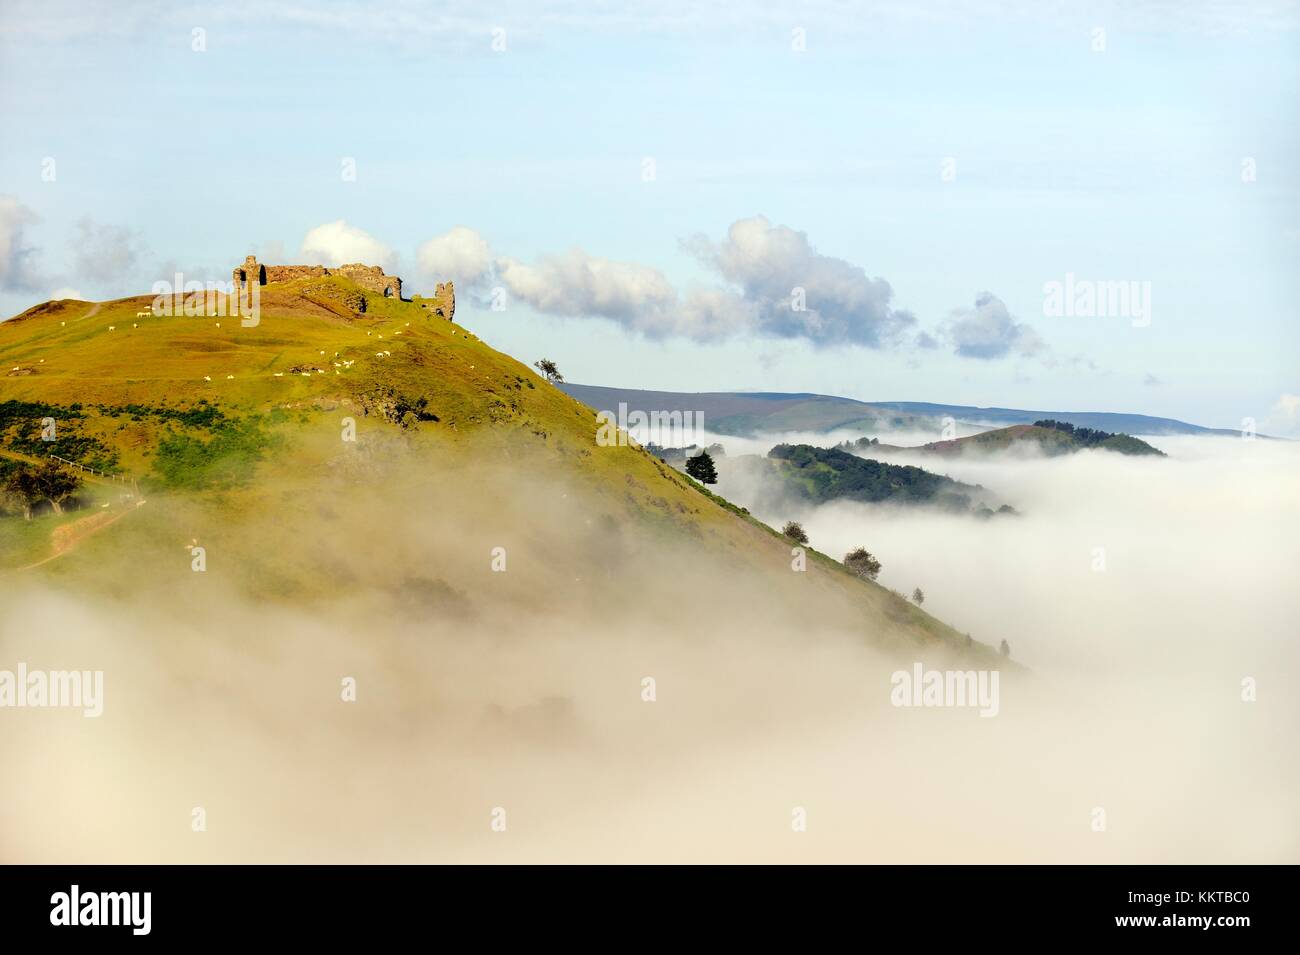 Castell Dinas Bran, Llangollen, Denbighshire, Wales. On an Iron Age site, the stone castle dates from 13 C. Summer morning mist Stock Photo